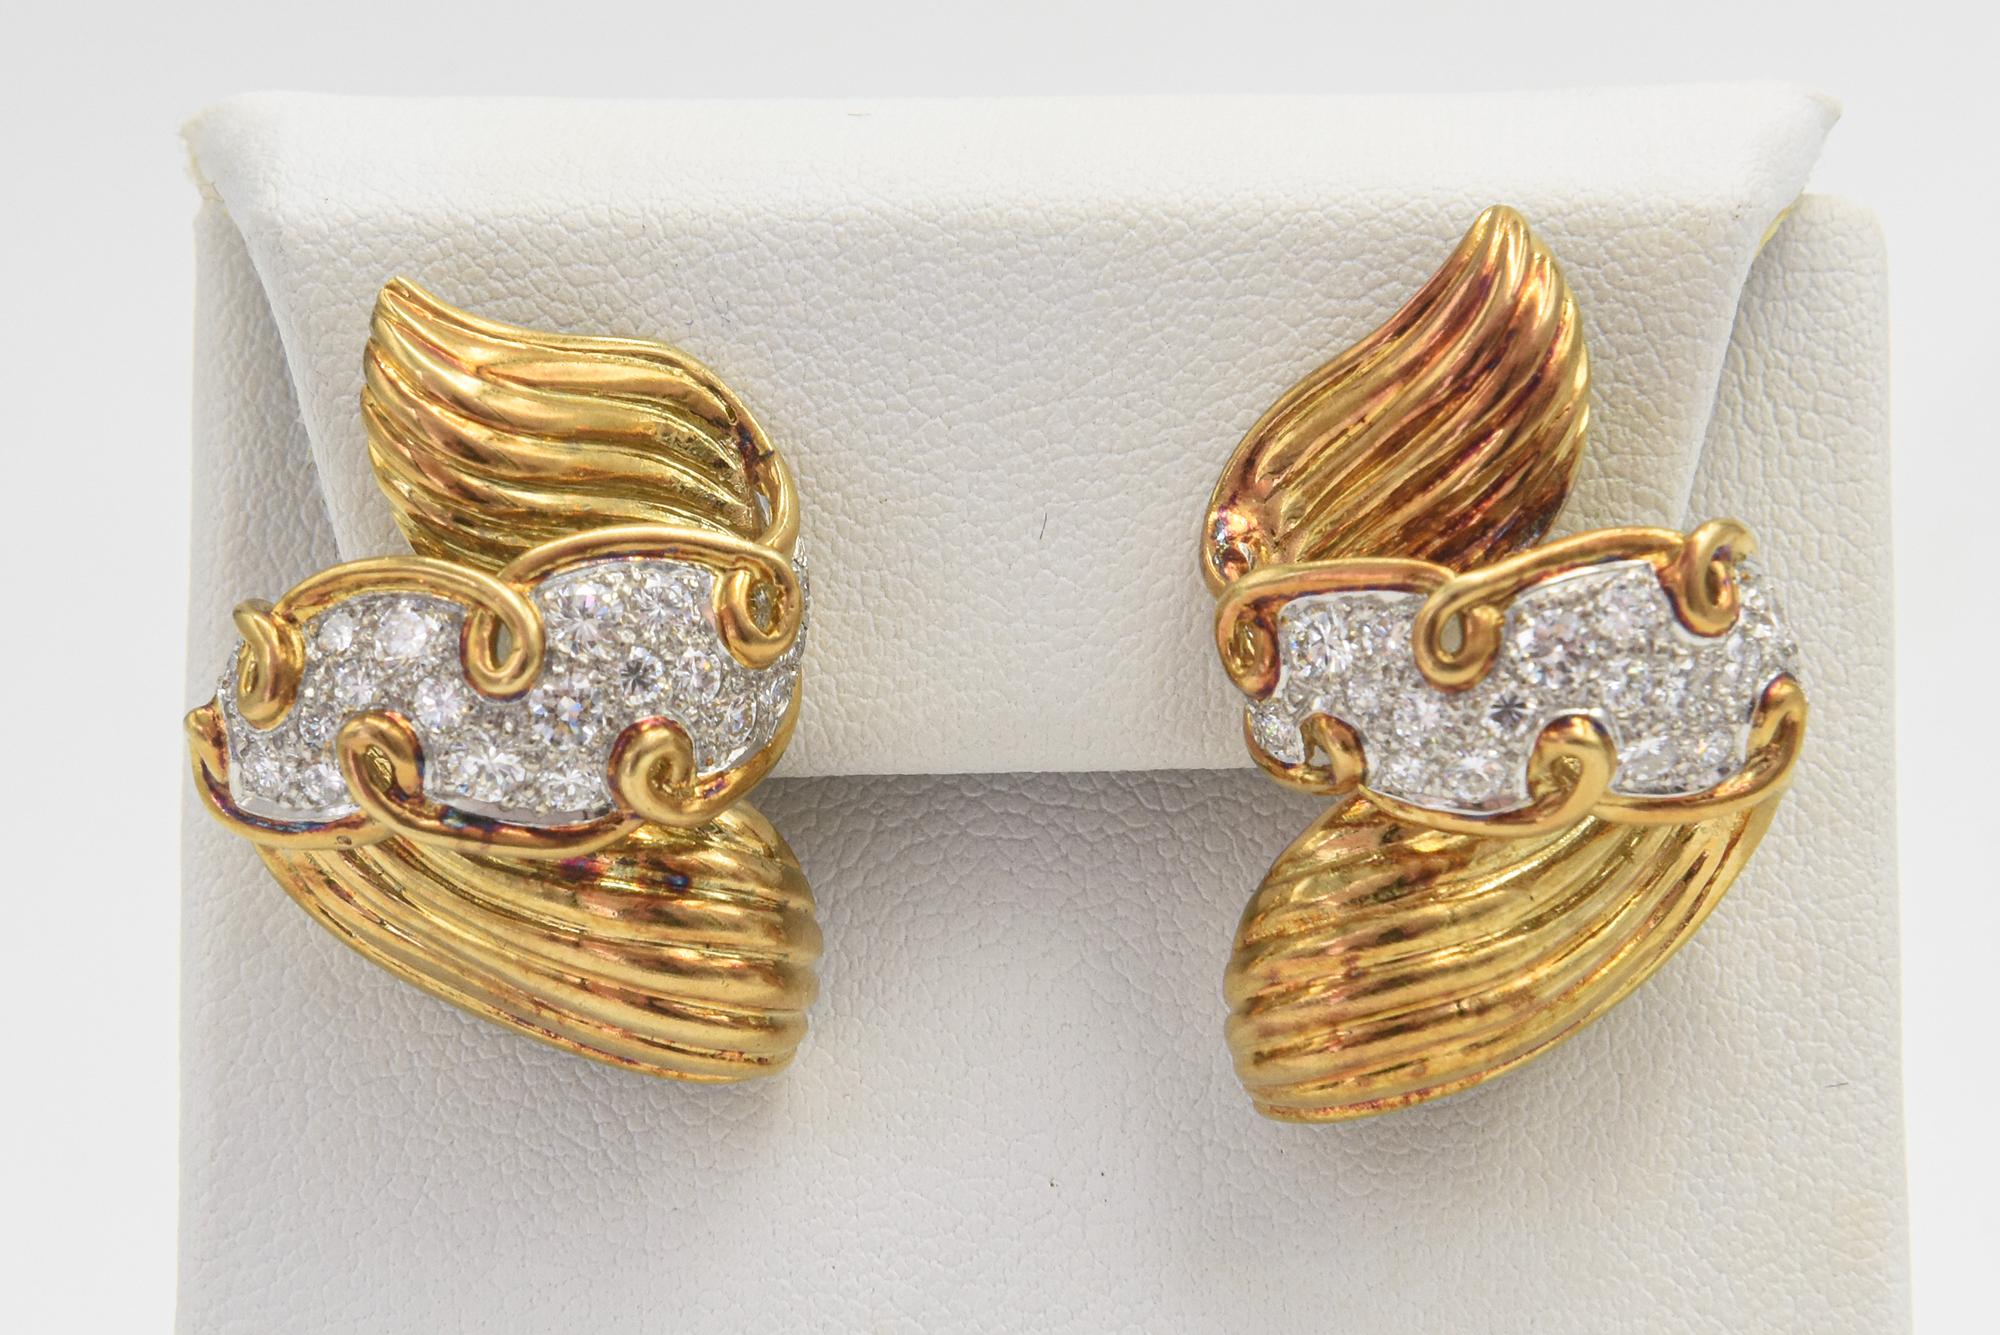 Gorgeous three dimensional ribbon earrings featuring a fluted gold design with a pave diamond center section. These 18k yellow gold earrings contain approximately 2.50 carats total weight in diamonds.  They have a lever back with a post so pierced